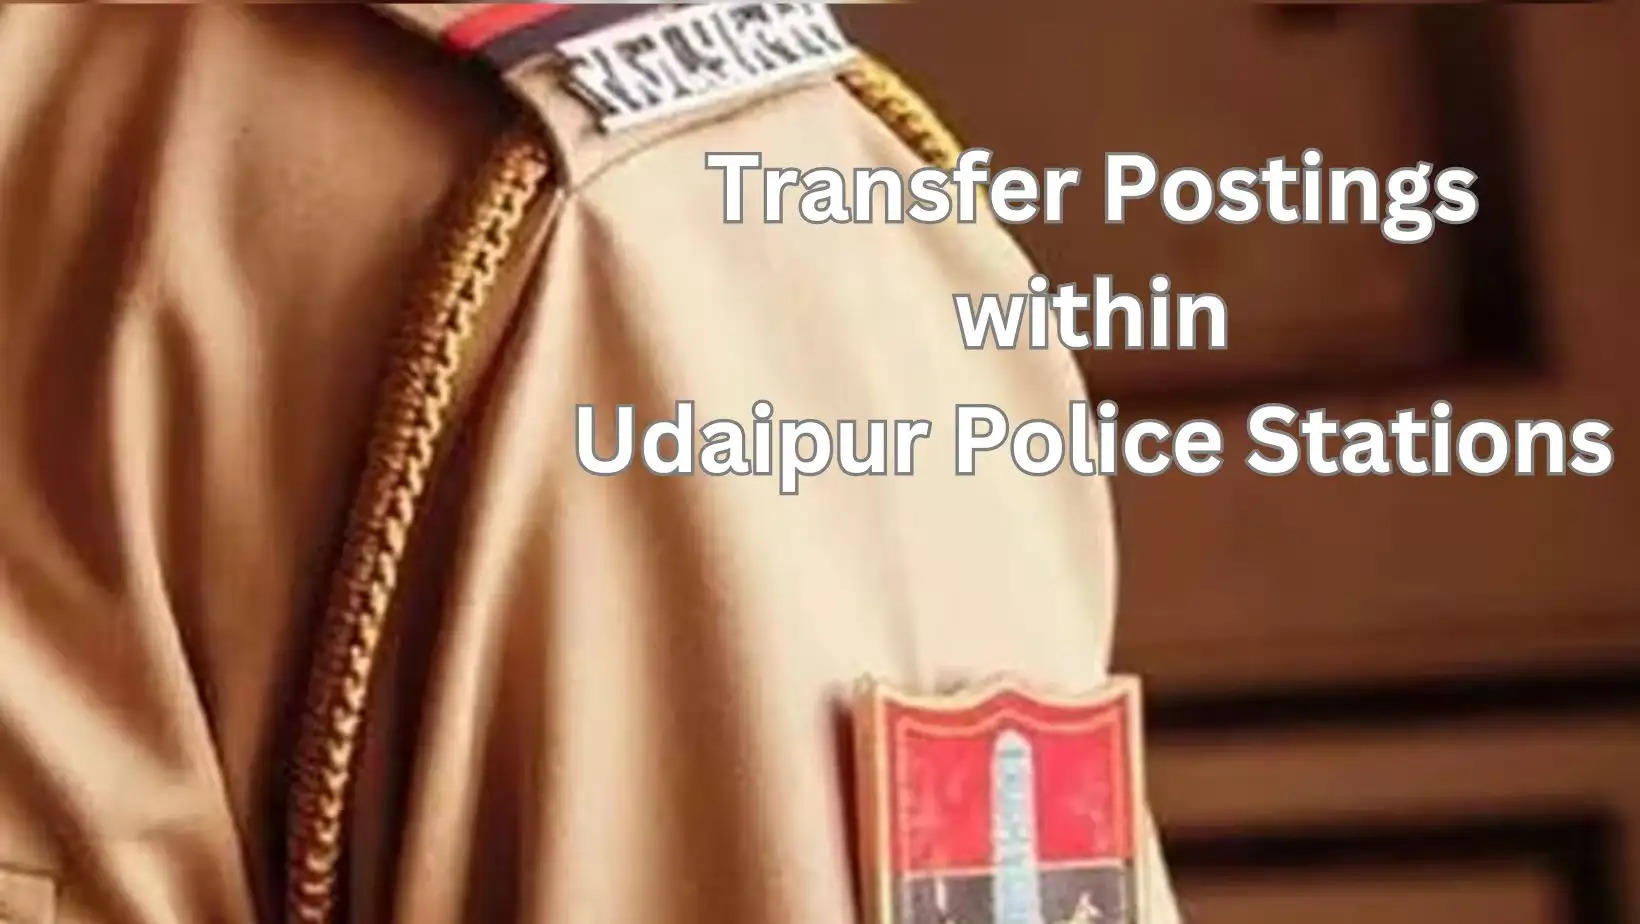 Udaipur Police Station Transfer Postings of Inspectors and Sub Inspectors